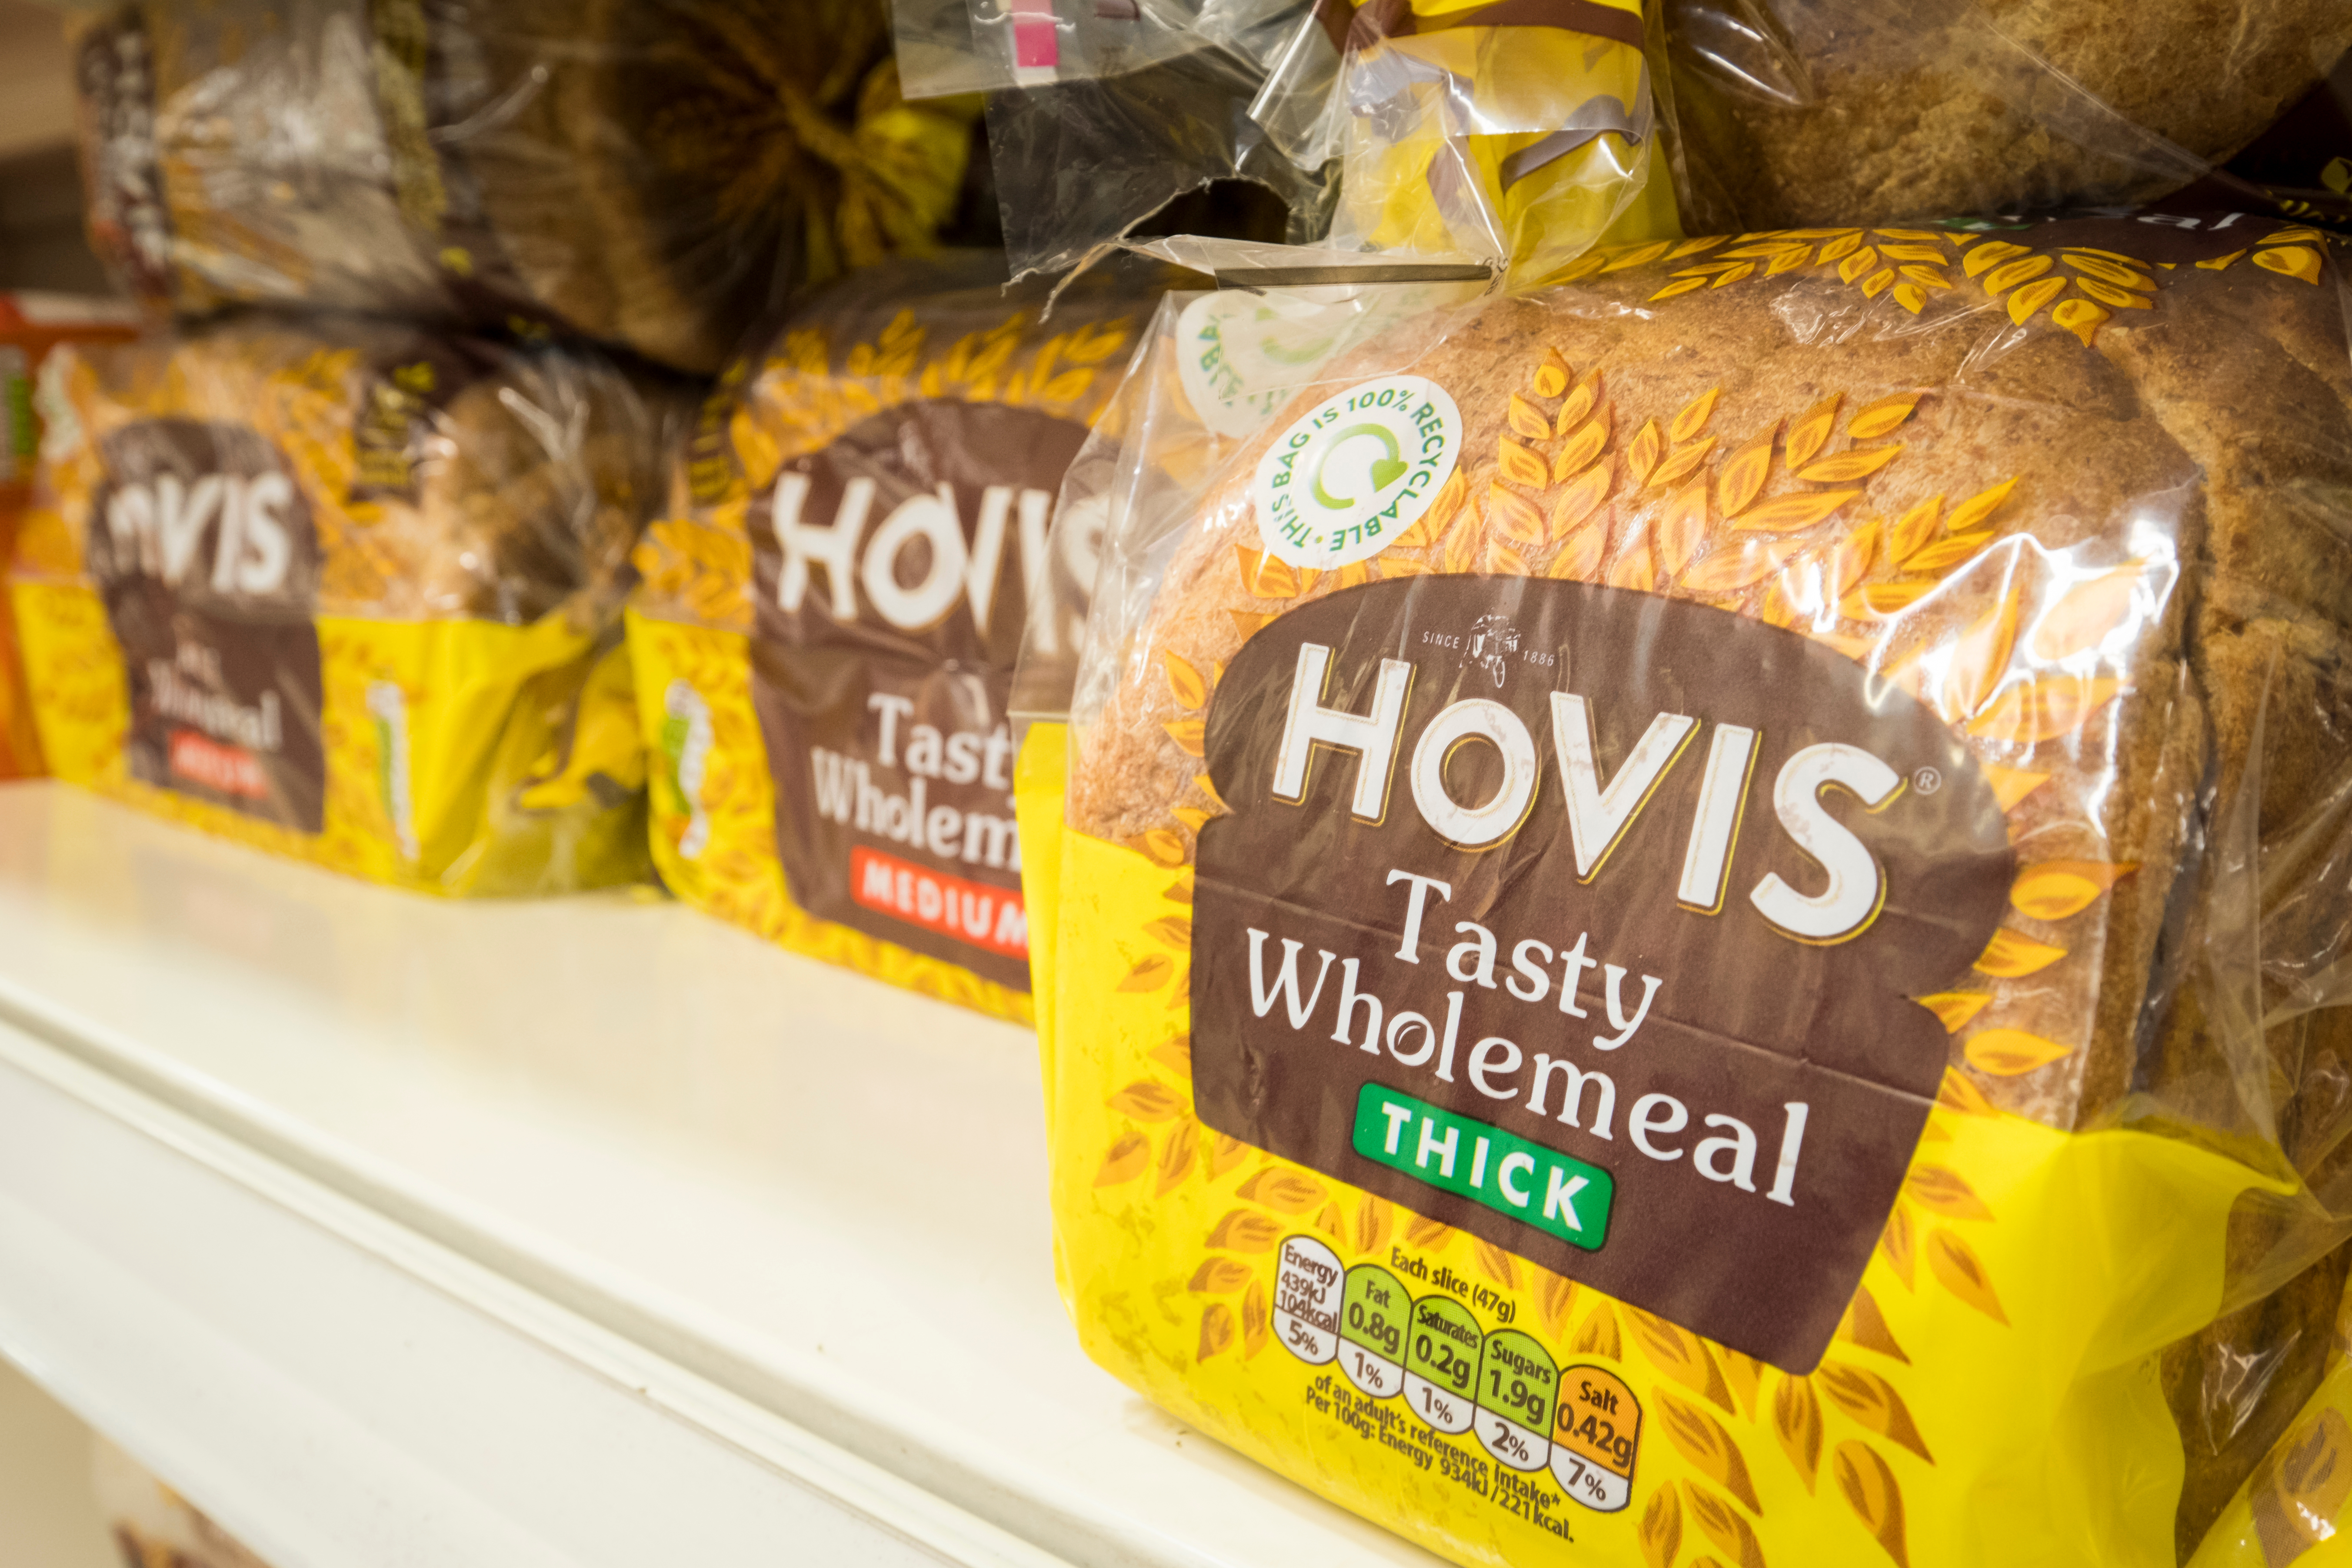 Hovis sold to private equity firm Endless